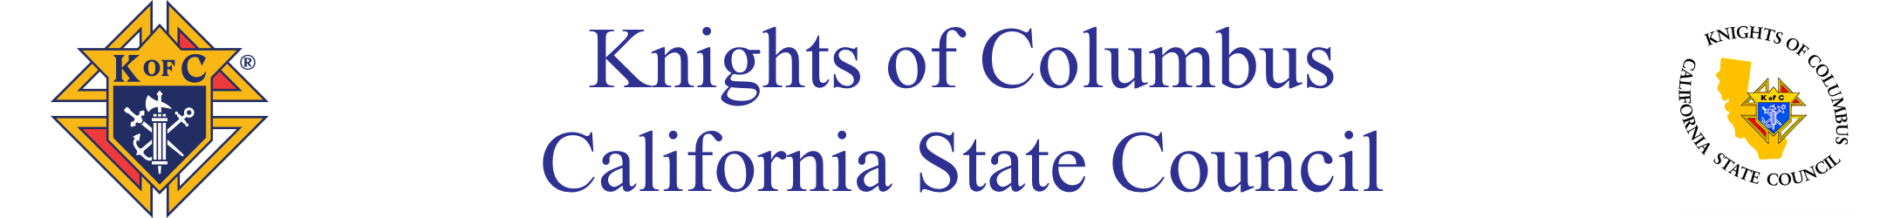 Knights of Columbus – California State Council #kofccalifornia @kofccalifornia